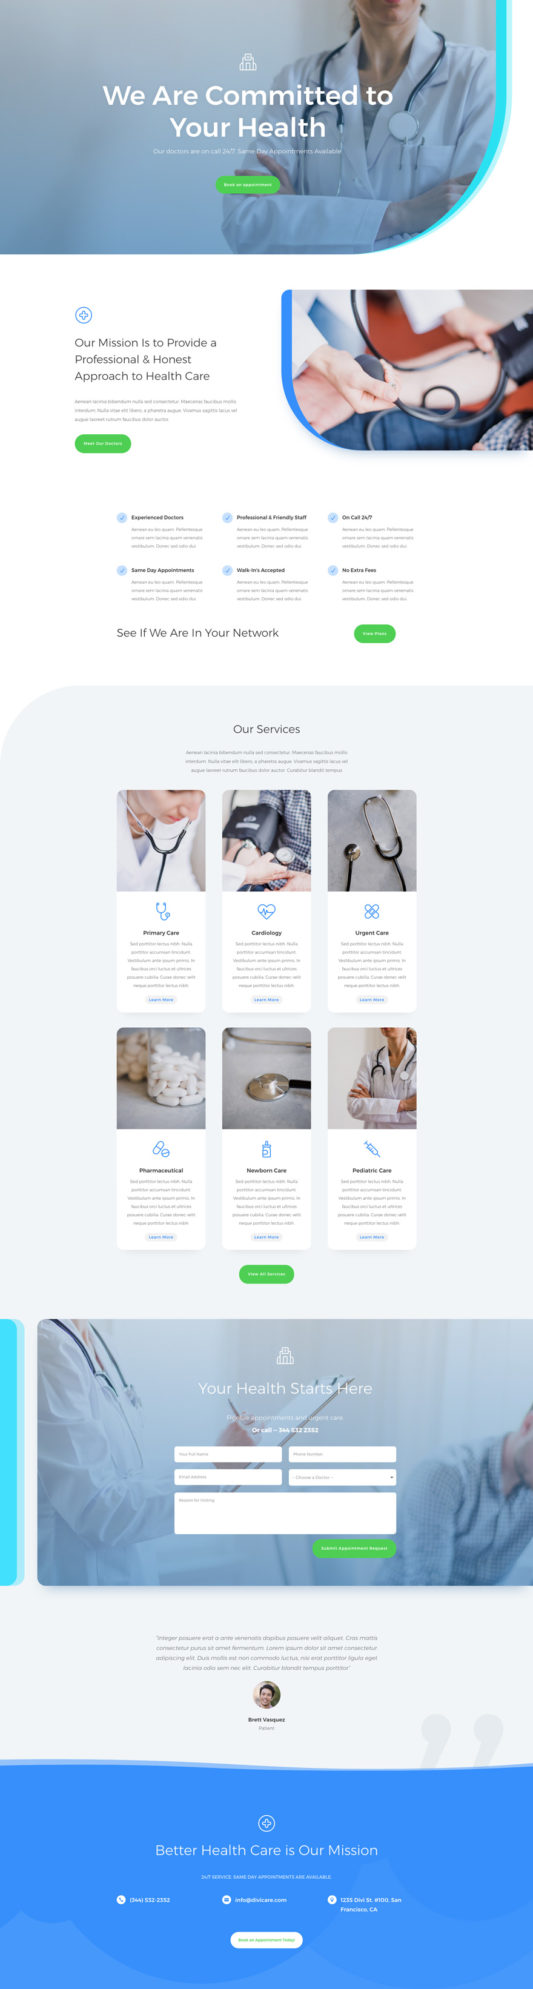 Doctor's Office Landing Page